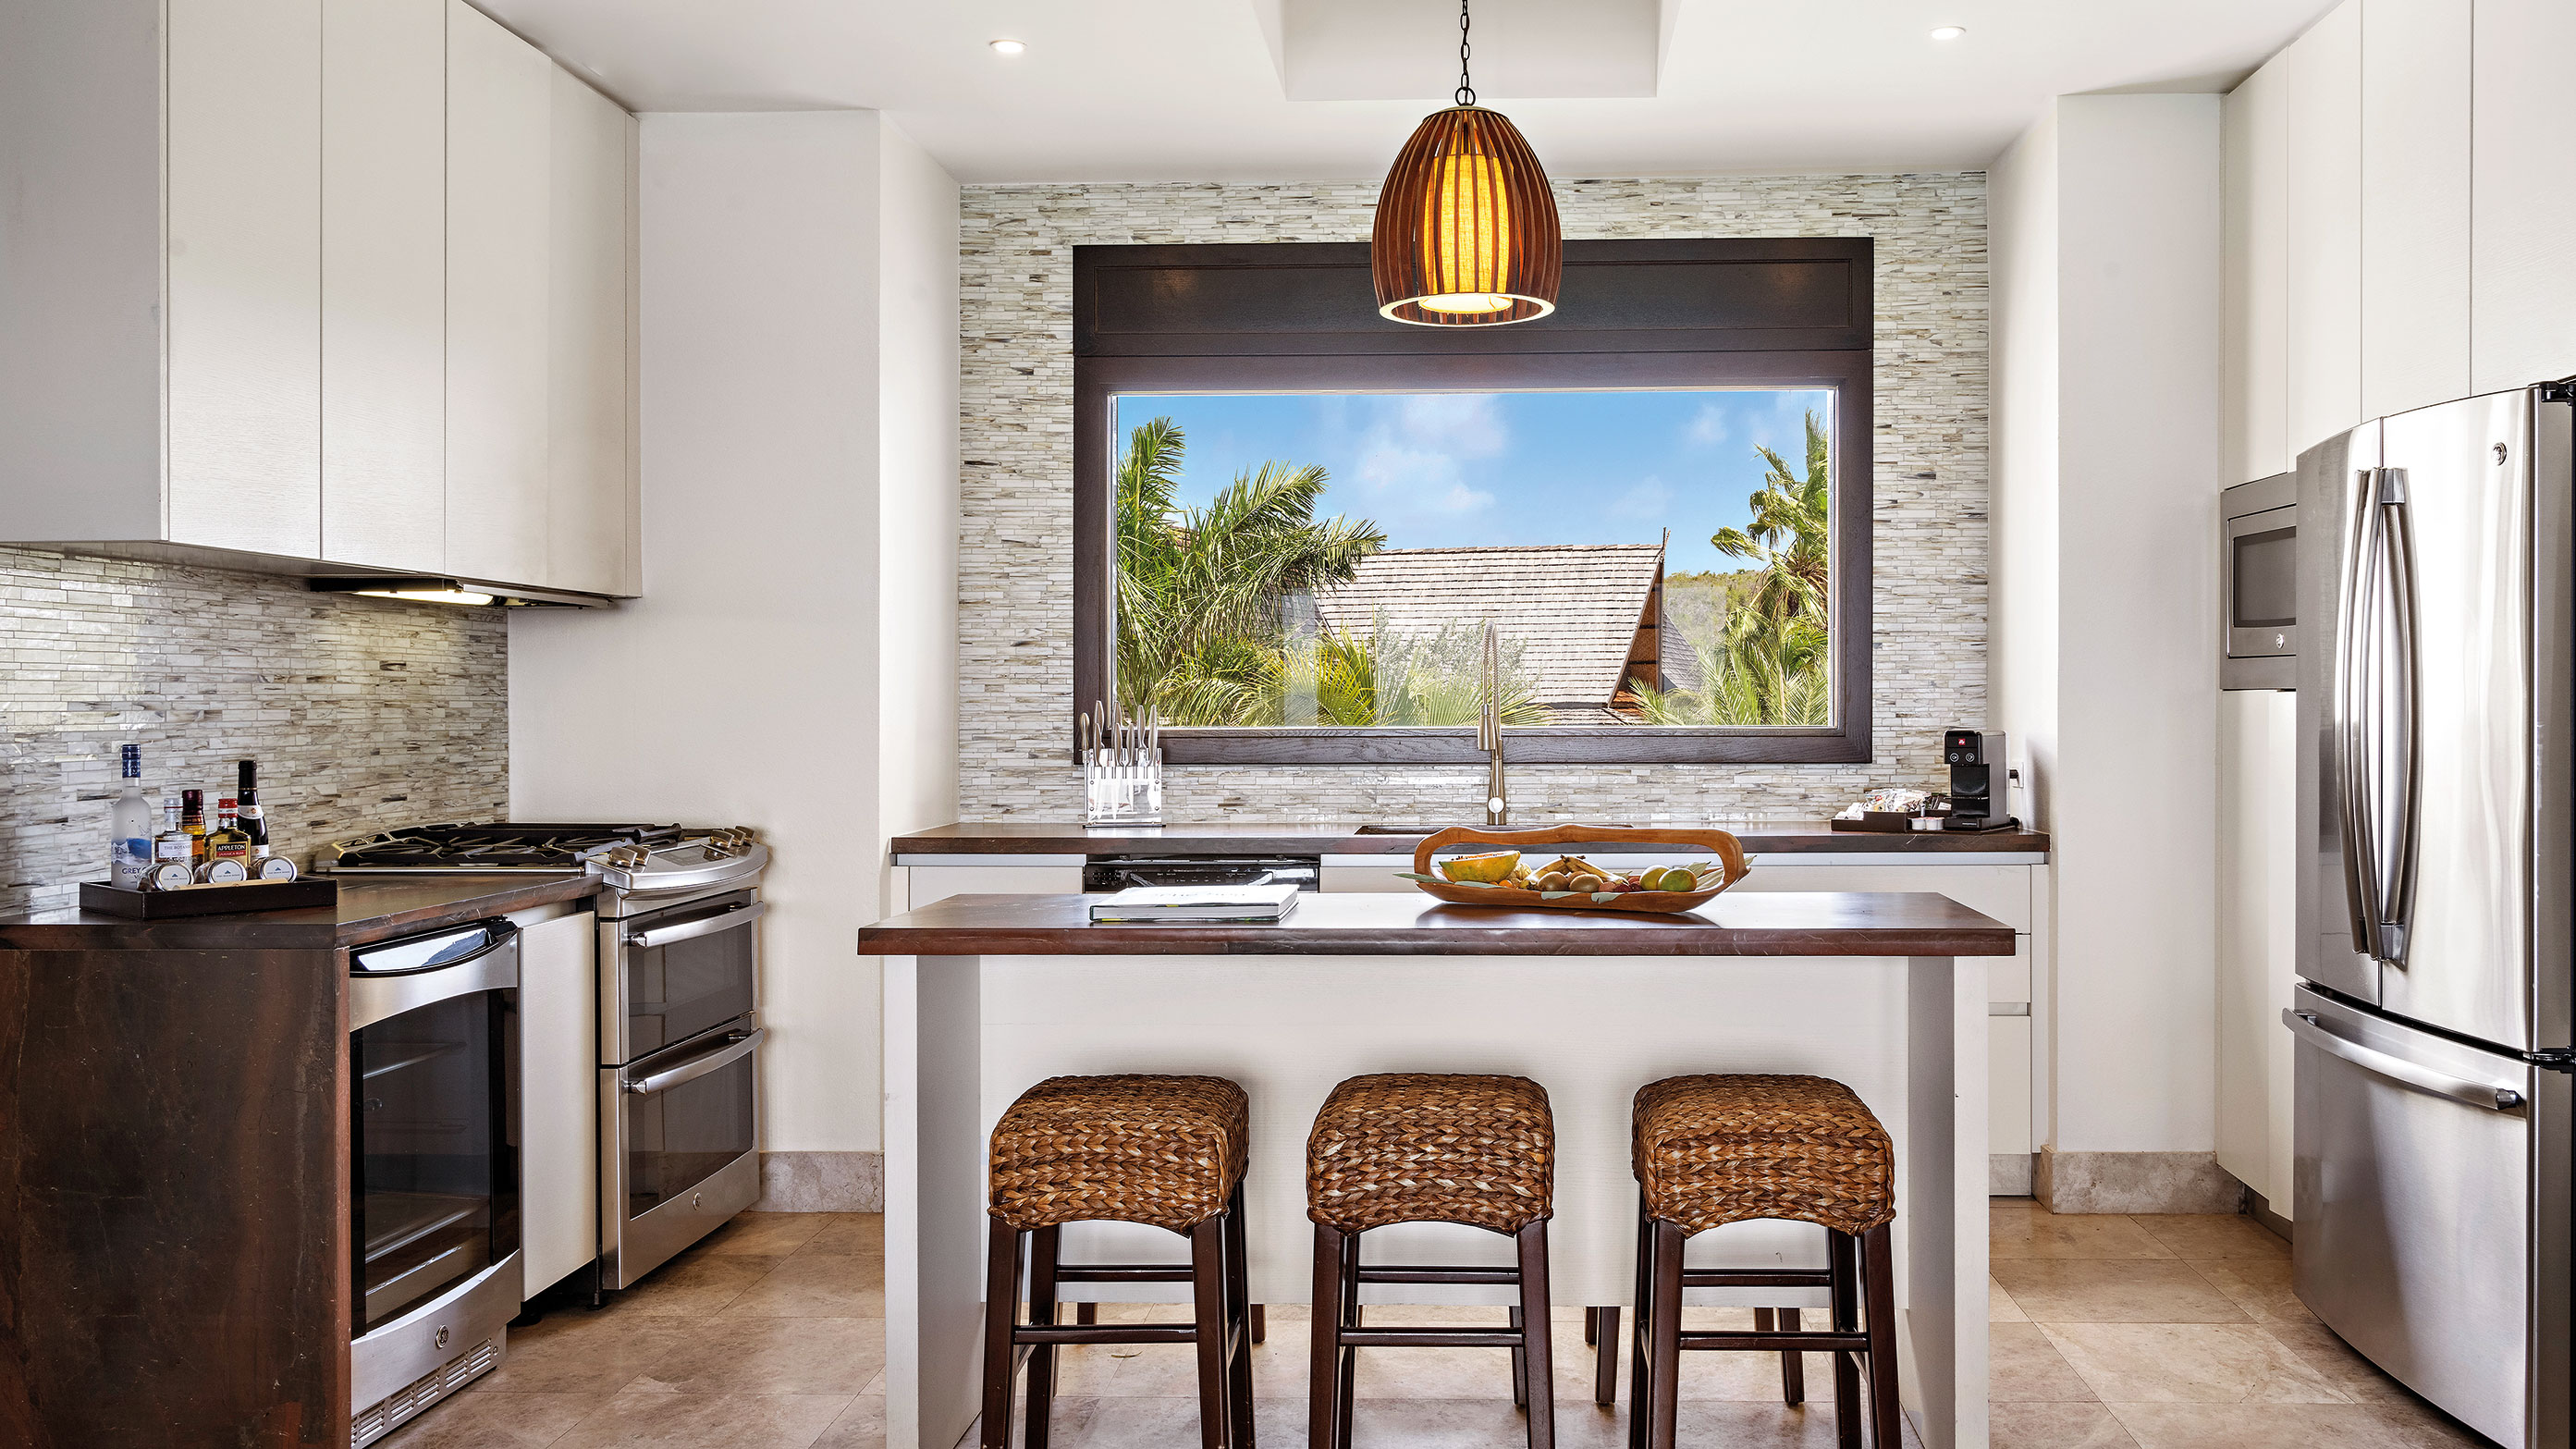 Kitchen island, stools, oven, and view of palm trees out of window